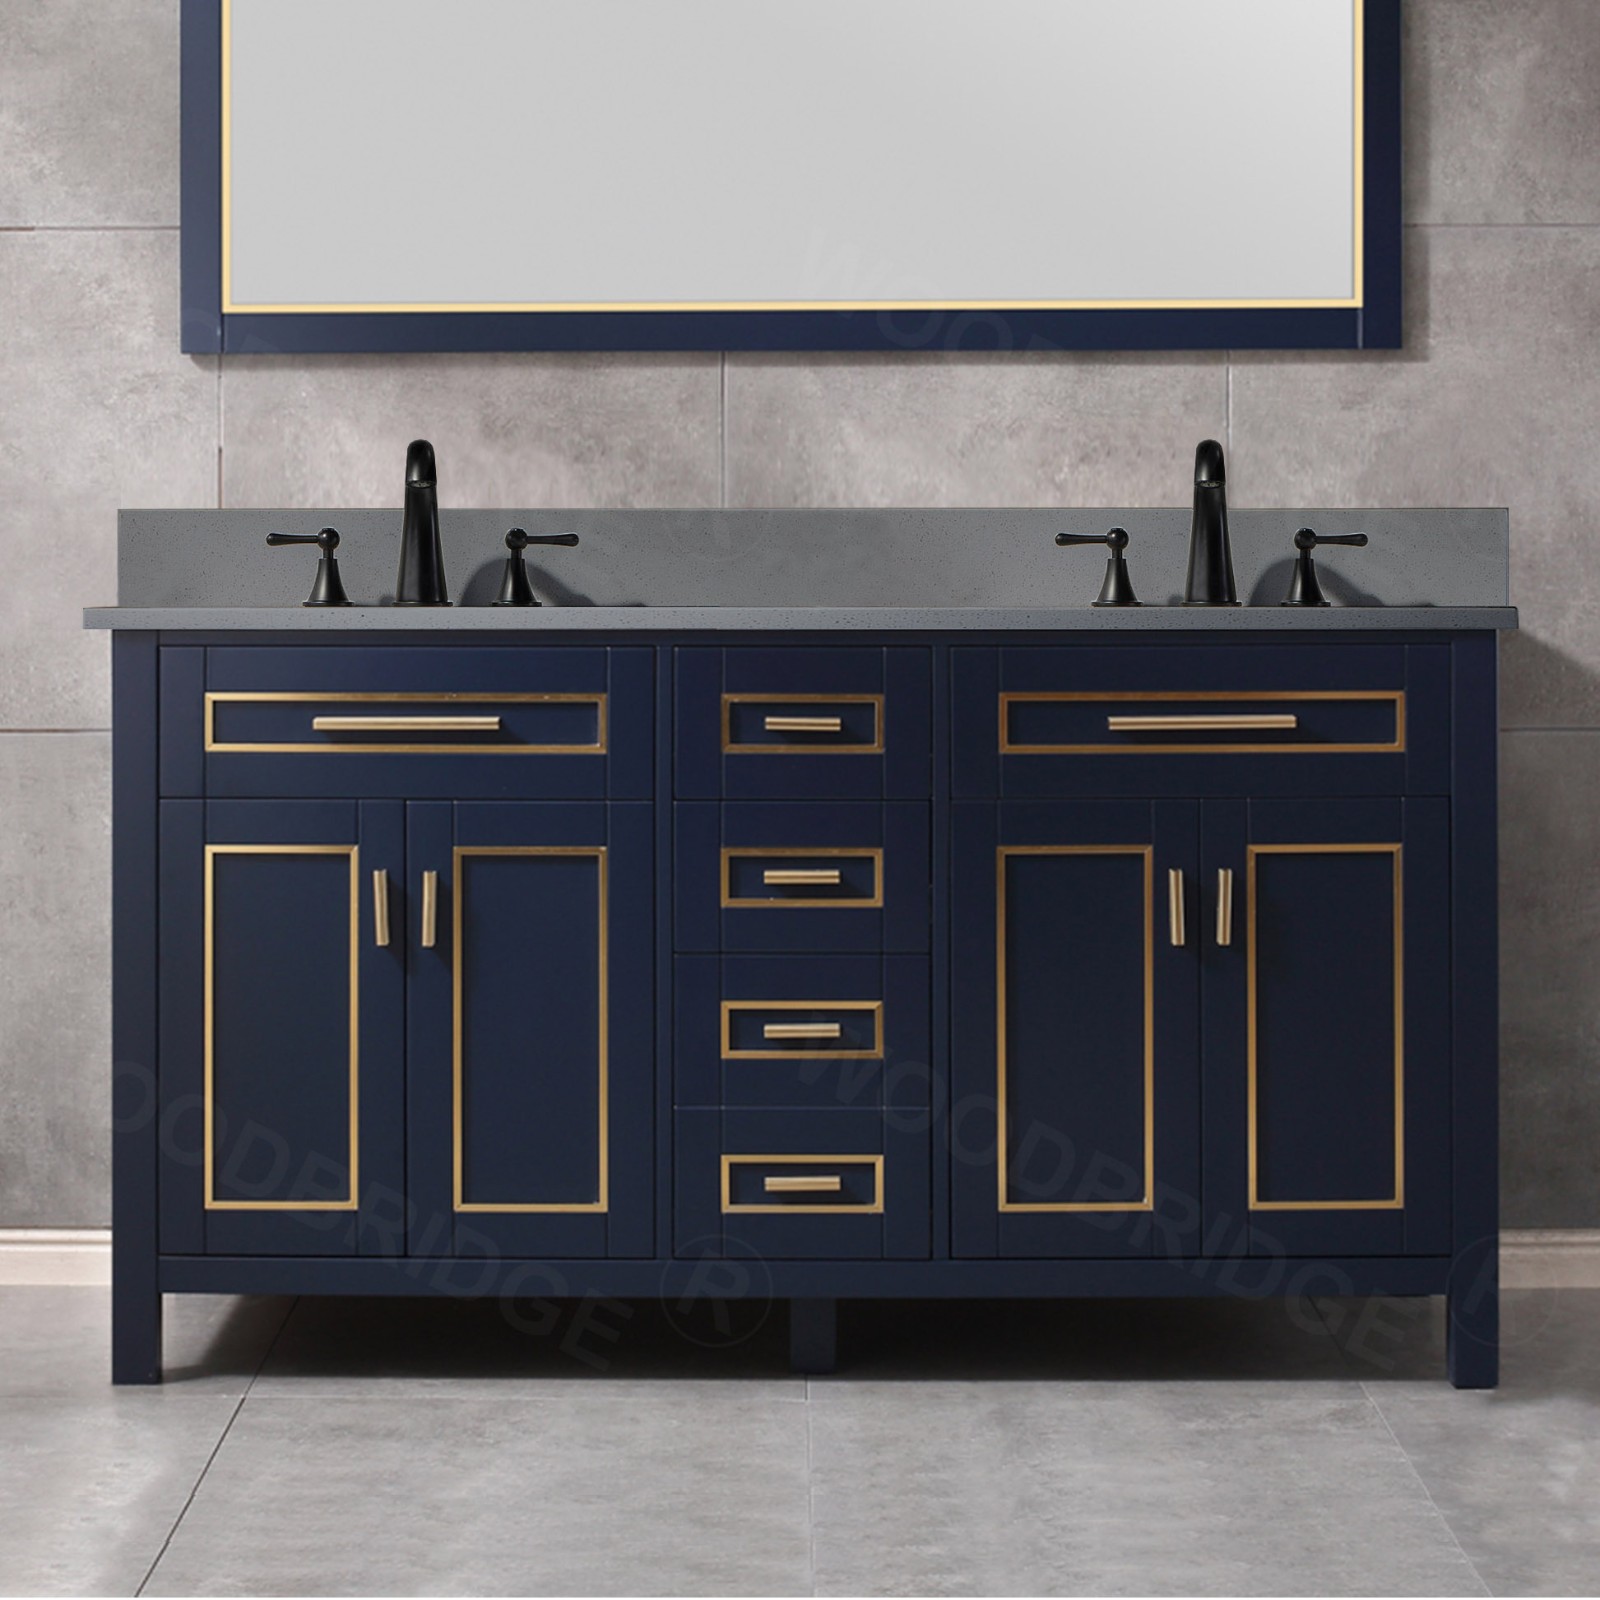  WOODBRIDGE Milan  61” Floor Mounted Single Basin Vanity Set with Solid Wood Cabinet in Navy Blue and Engineered stone composite Vanity Top in Dark Gray with Pre-installed Undermount Rectangle Bathroom Sink in White and Pre-Drilled 3-Hole for 4” Centerset_4644